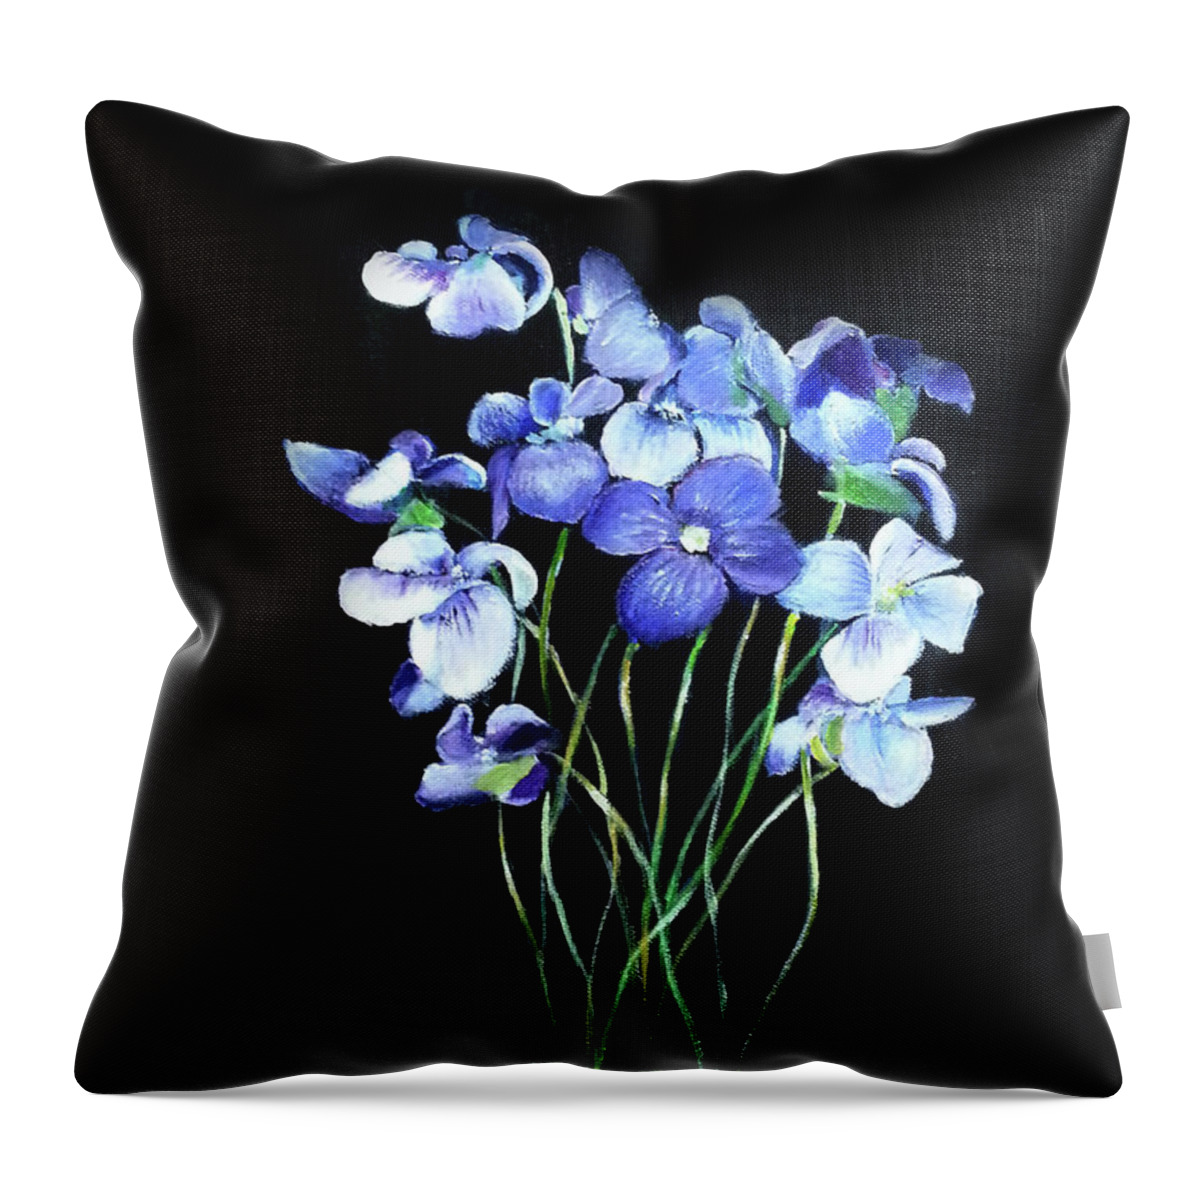 Modern Art Throw Pillow featuring the painting Violet by Florentina Maria Popescu